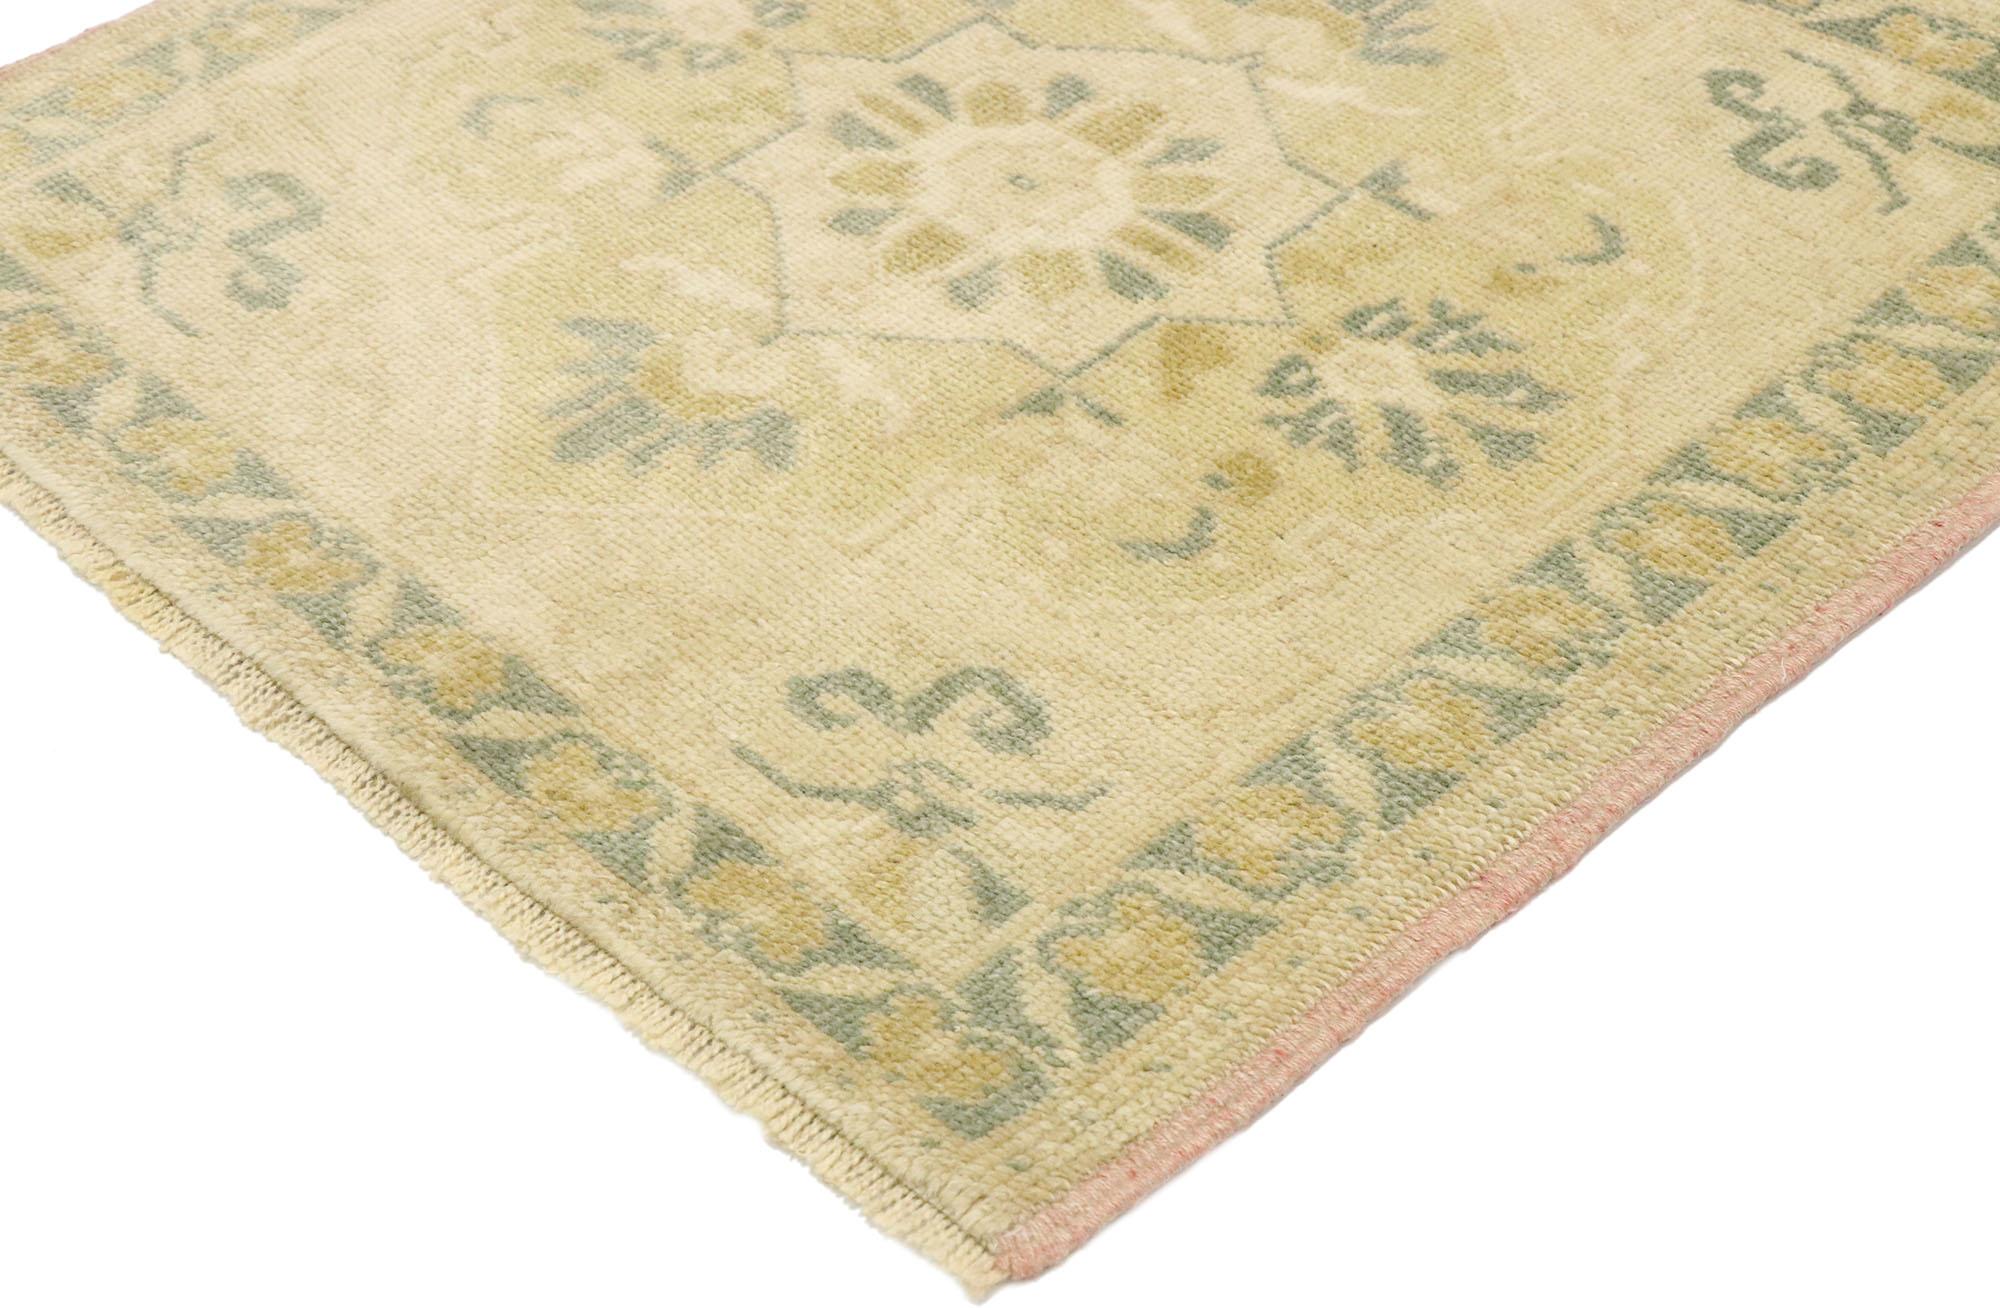 53010, vintage Turkish Oushak Yastik scatter rug with neoclassical cottage style, small square accent rug. Effortless beauty and simplicity meet soft, bespoke vibes with a neoclassical cottage style in this hand knotted wool vintage Turkish Oushak